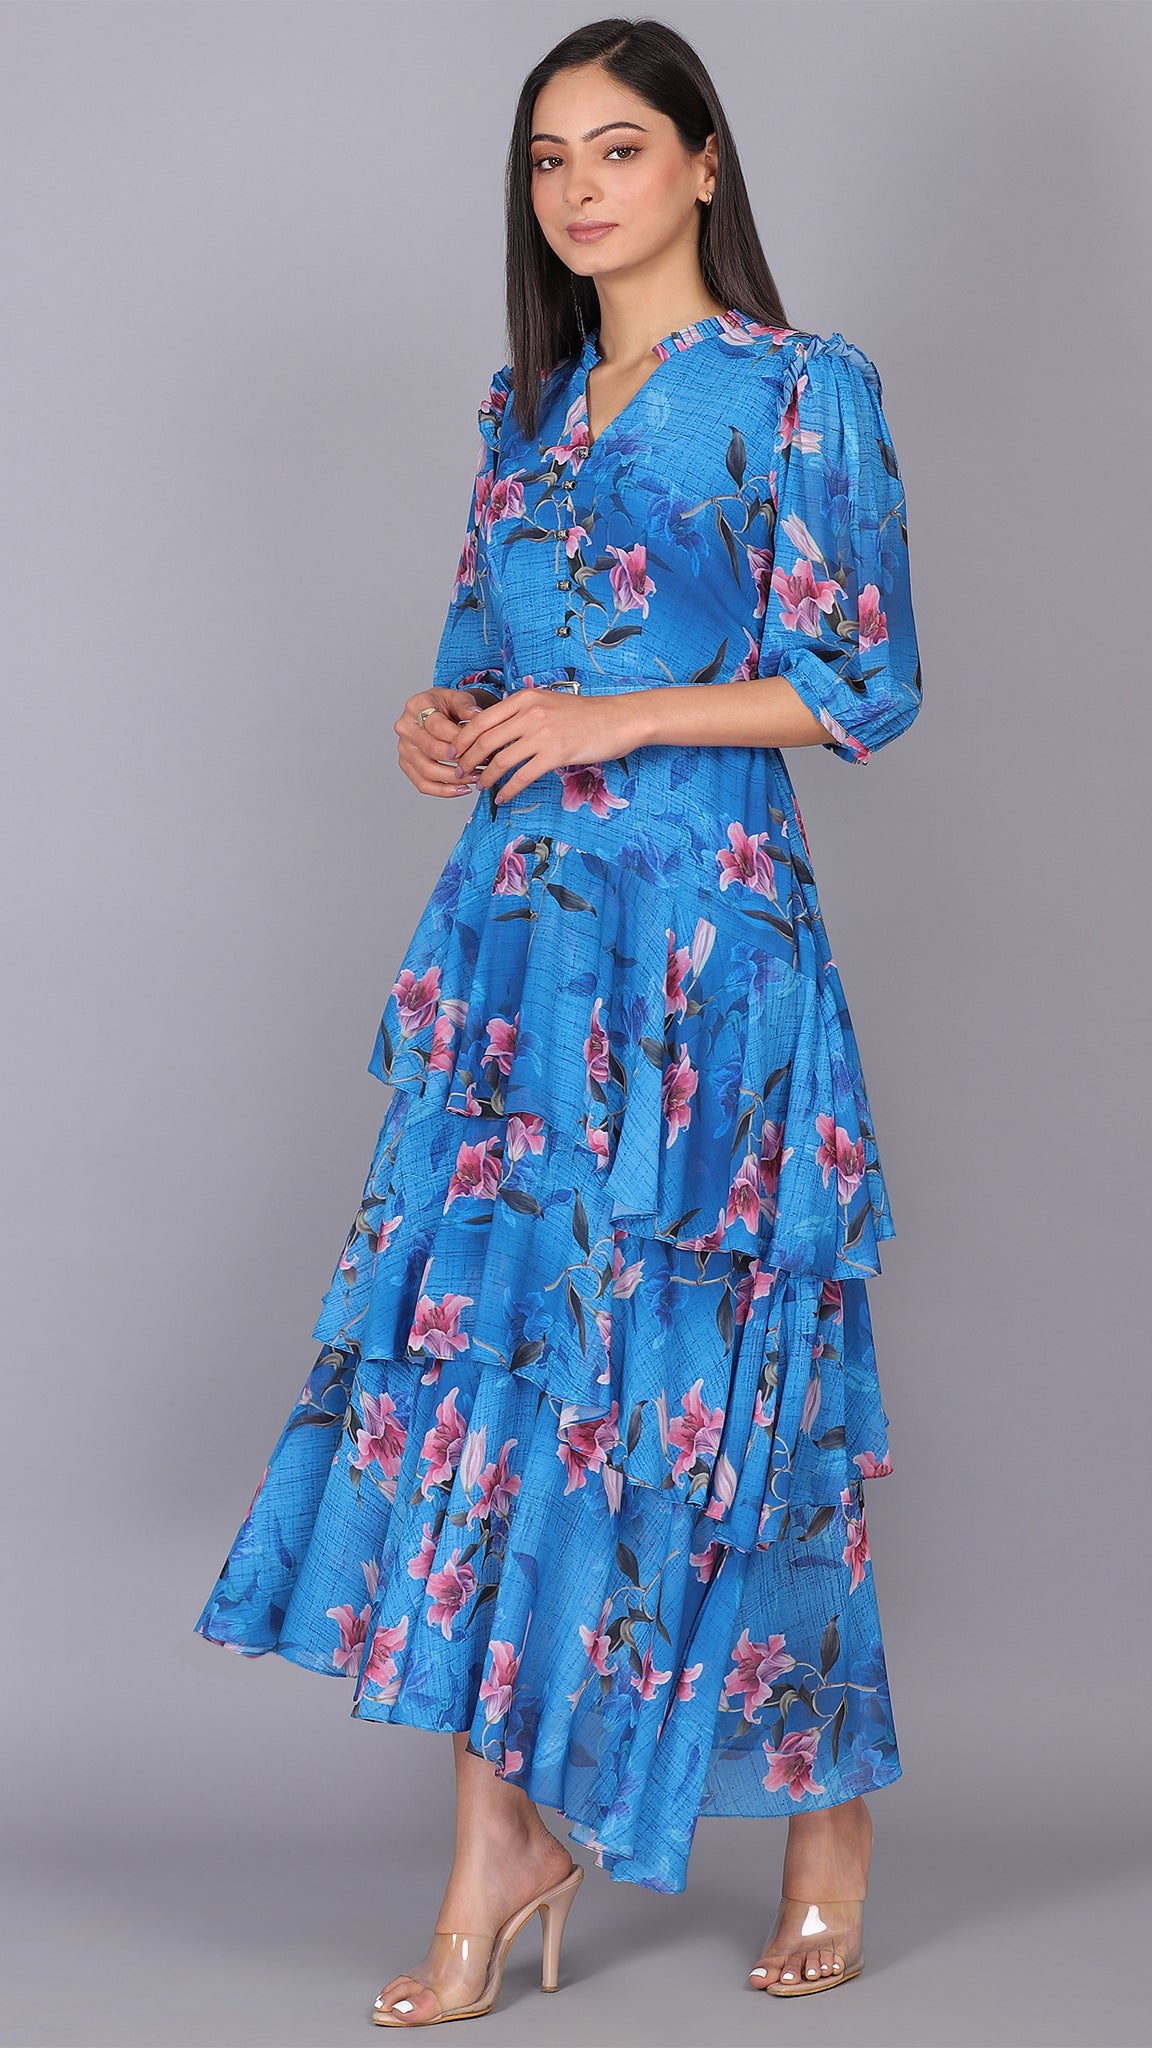 Buy floral dresses in India @ Limeroad